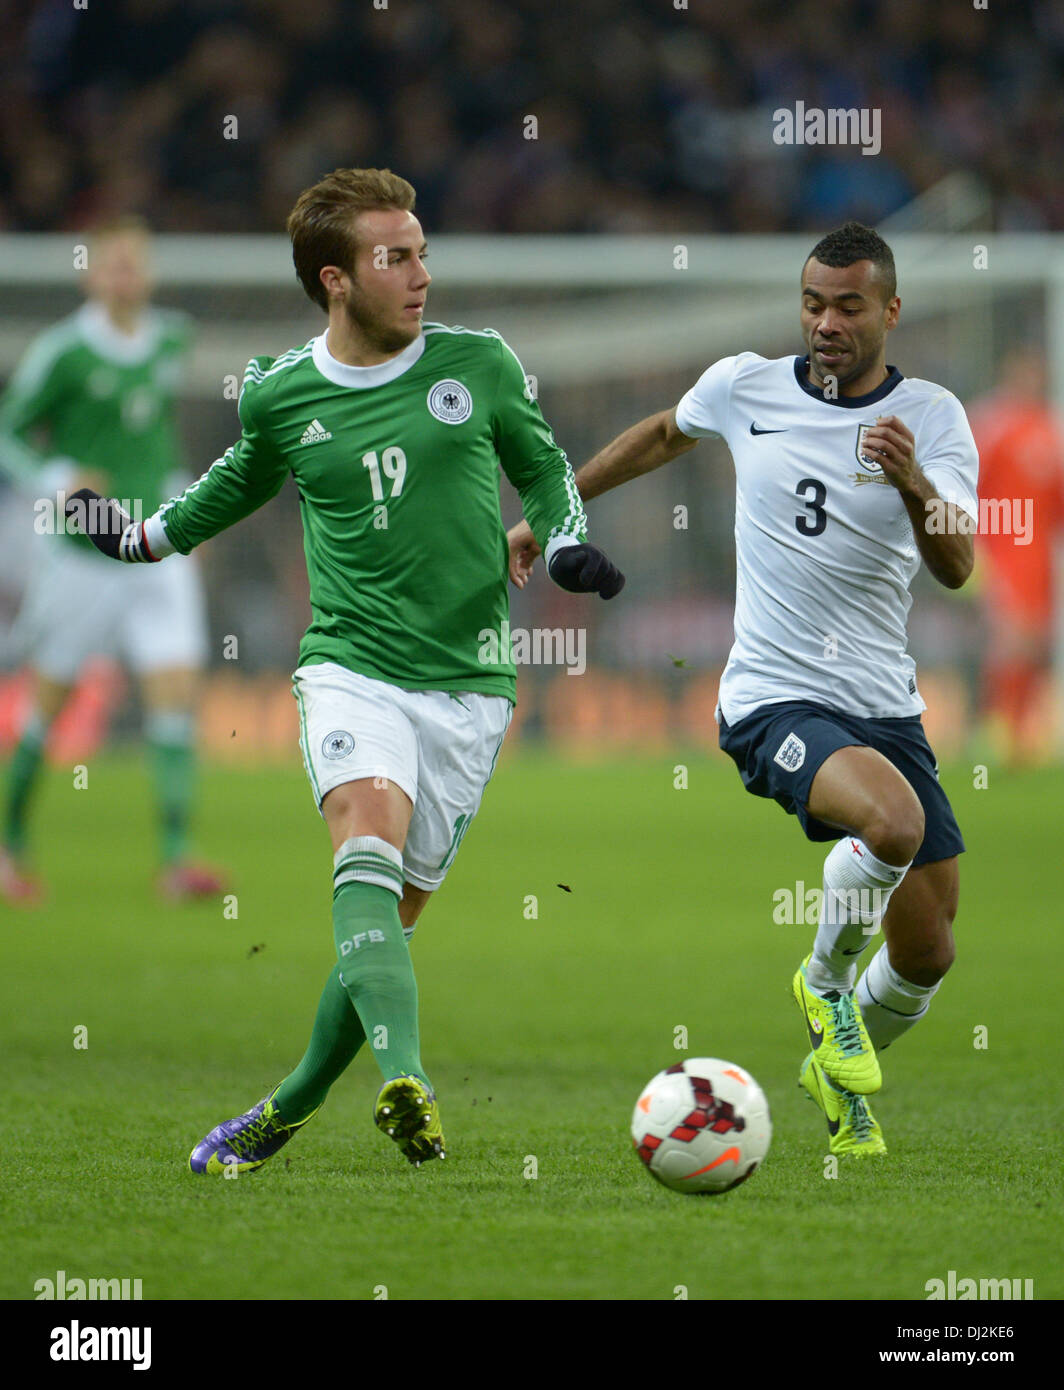 London, UK. 19th Nov, 2013. England's Ashley Cole and Germany's Mario Goetze (L) vie for the ball during the friendly soccer match between England and Germany at Wembley Stadium in London, England, 19 November 2013. Photo: Andreas Gebert/dpa/Alamy Live News Stock Photo